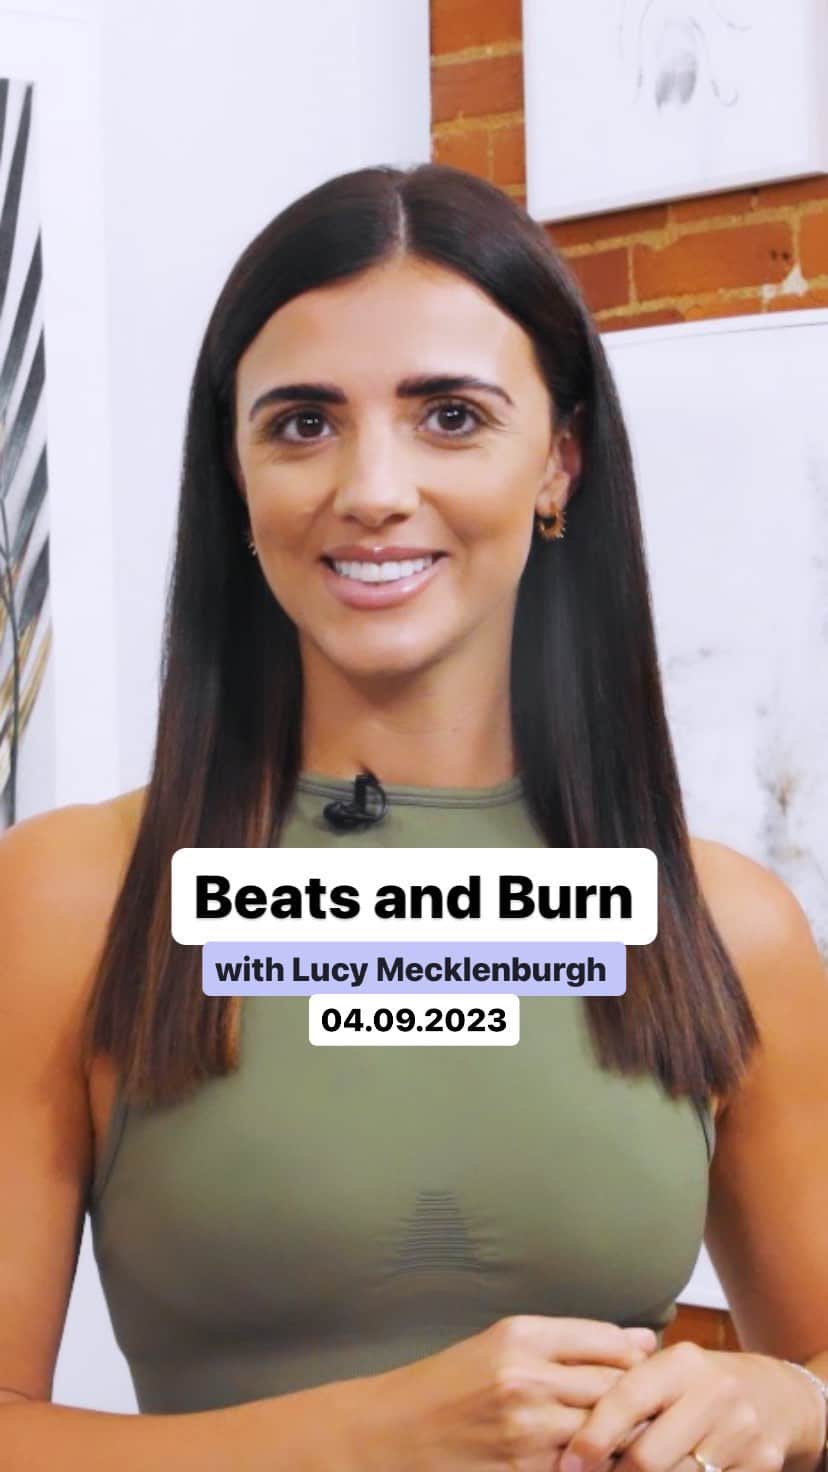 ルーシー・メックレンバーグのインスタグラム：「My brand new programme, Beats & Burn, launches 1 week today!! 🔥 AD   Achieve incredible results, establish a fresh routine & fall in love with at-home fitness in just 6 weeks. I’ve designed this programme to be full of fun, motivating workout styles that are just 20 minutes long - they’ll fit seamlessly into your busy lifestyle, just like they do mine!  Whether you want to shed excess weight, tone up or simply create a healthier balance in your lifestyle, my combination of 20 minute workouts 4 times a week & family friendly meals will help you reach your goals 🙏🏻  Over the 6 weeks you’ll be boosting your mood with Dancefit, punching the days frustrations away with Combat, building strength with Weights to Music & challenging your whole body with Pilates 🤩   I’ll also be bringing you a collection of my favourite 20 minute, family friendly recipes as well as a nutritional guide to support you to make simple, lifelong changes to your diet! You’ll also be able to track your progress inside the the app for extra motivation   Once the school holidays are over and the kids are back to school, it’s YOUR time to prioritise your health & wellbeing - so come along on the Beats & Burn journey with me and let’s do it together!   🚨 Don’t miss your chance to be a part of my exclusive in-app VIP Beats & Burn community. The RWL Team & I will be right by your side, supporting & motivating you every step of the way 🔐 Sign up before midnight on 4th September to get access to this community as well as the full programme   #rwl #rwlfitties #rwlbeatsandburn #onlinehomeworkouts #homeworkouts」